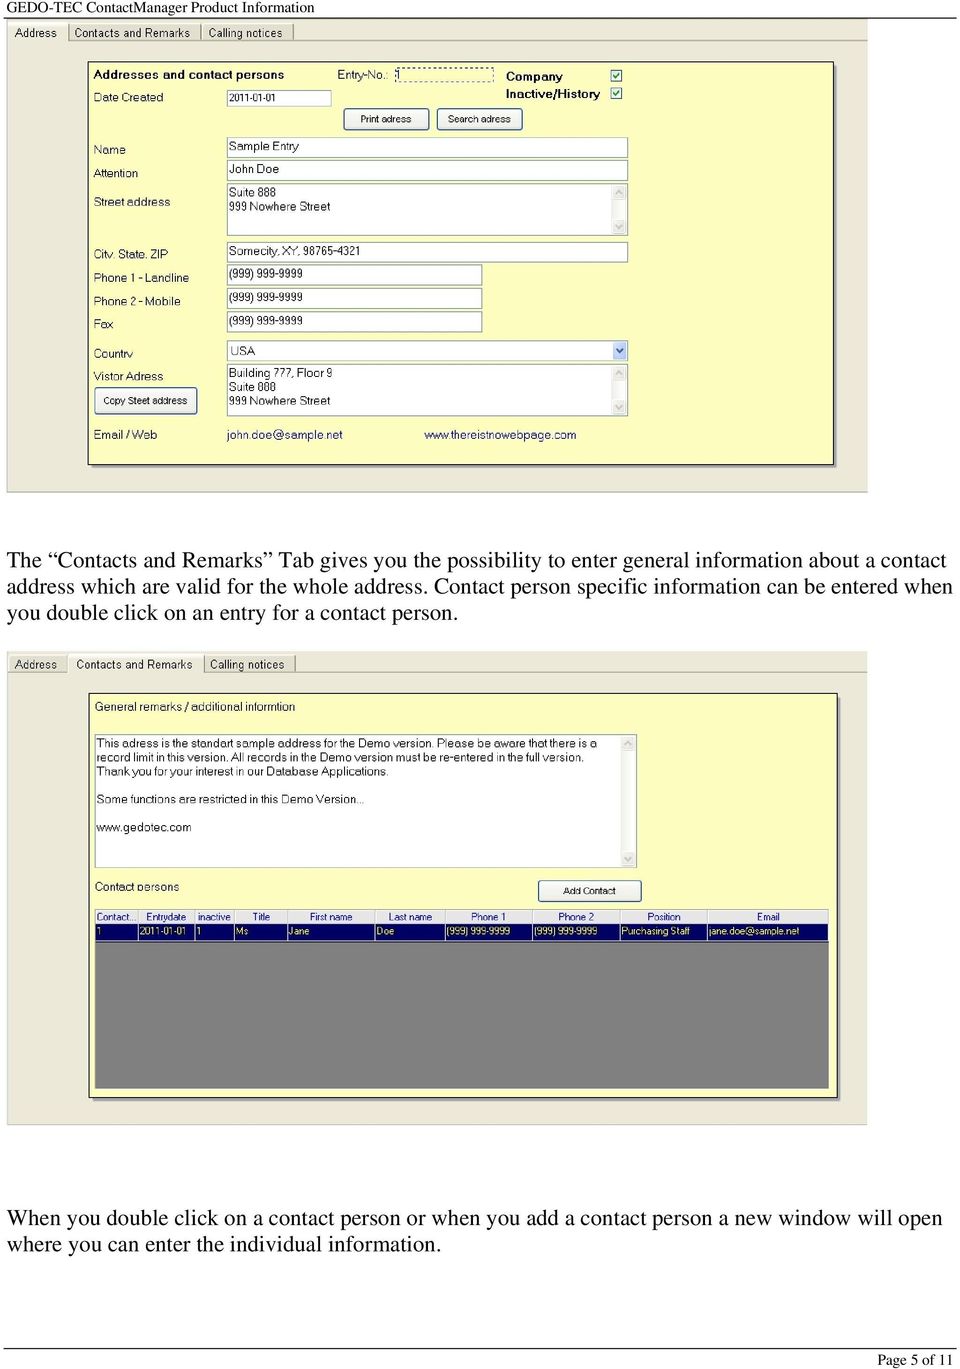 Contact person specific information can be entered when you double click on an entry for a contact